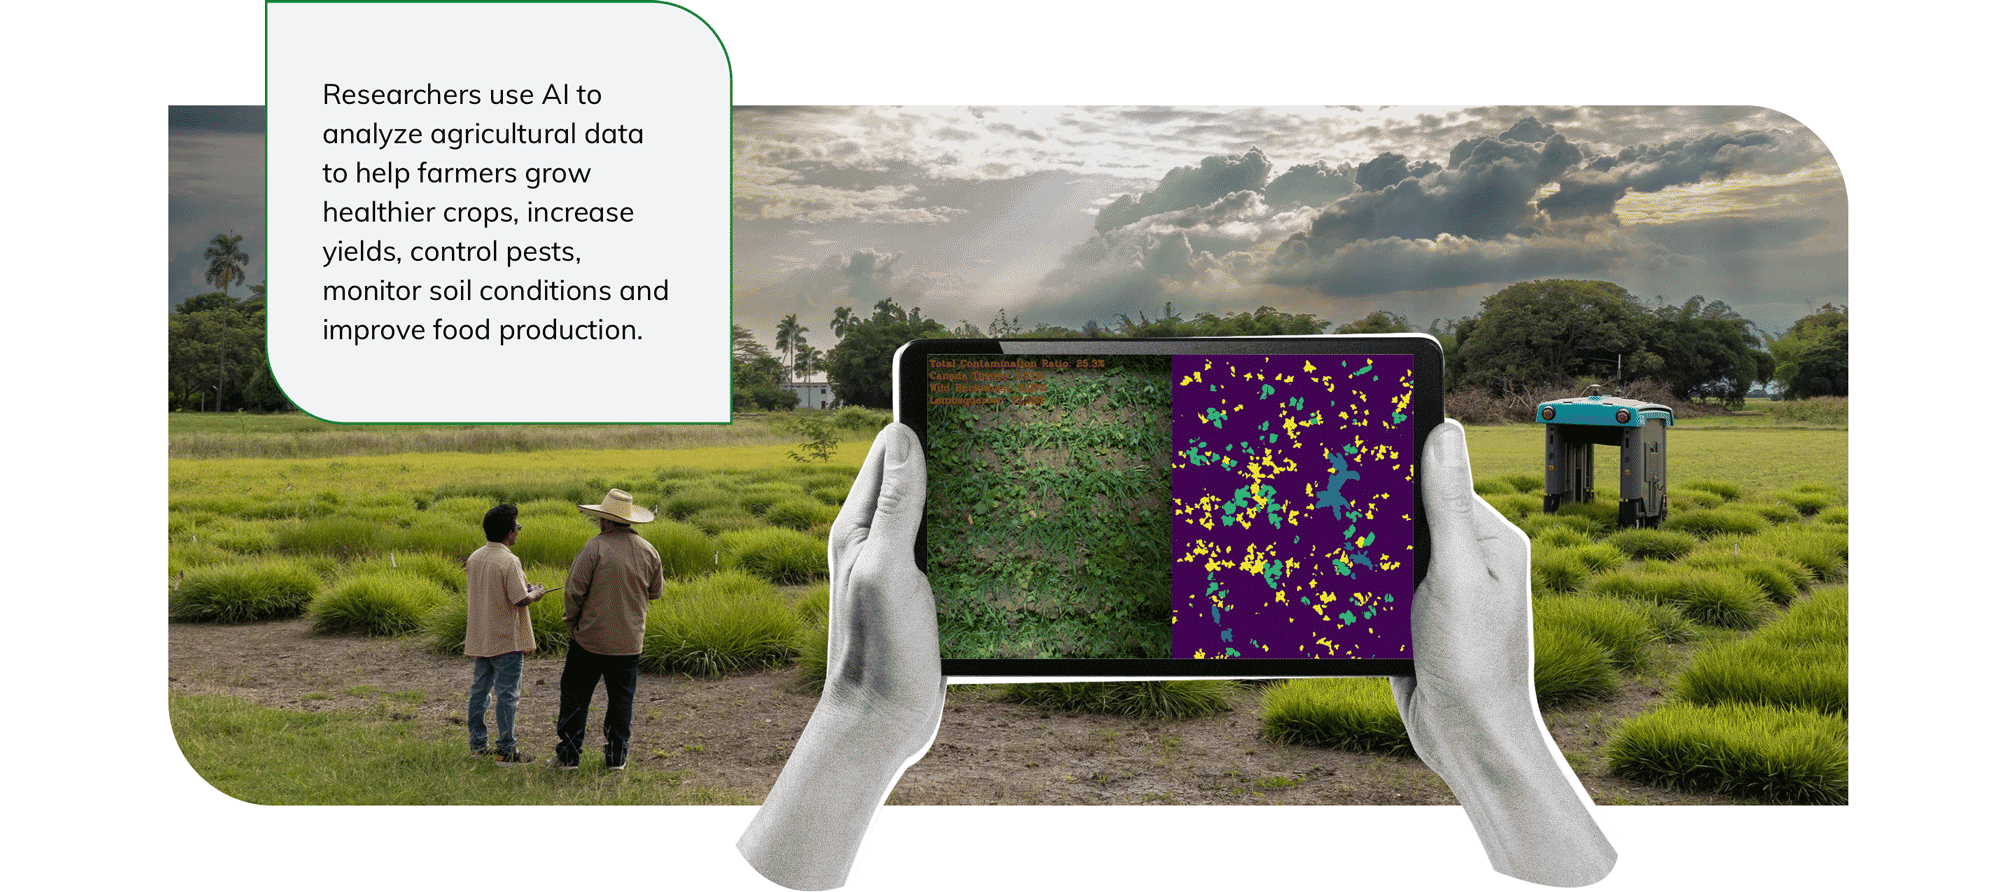 Researchers use AI to analyze agricultural data to help farmers grow healthier crops, increase yields, control pests, monitor soil conditions and improve food production.